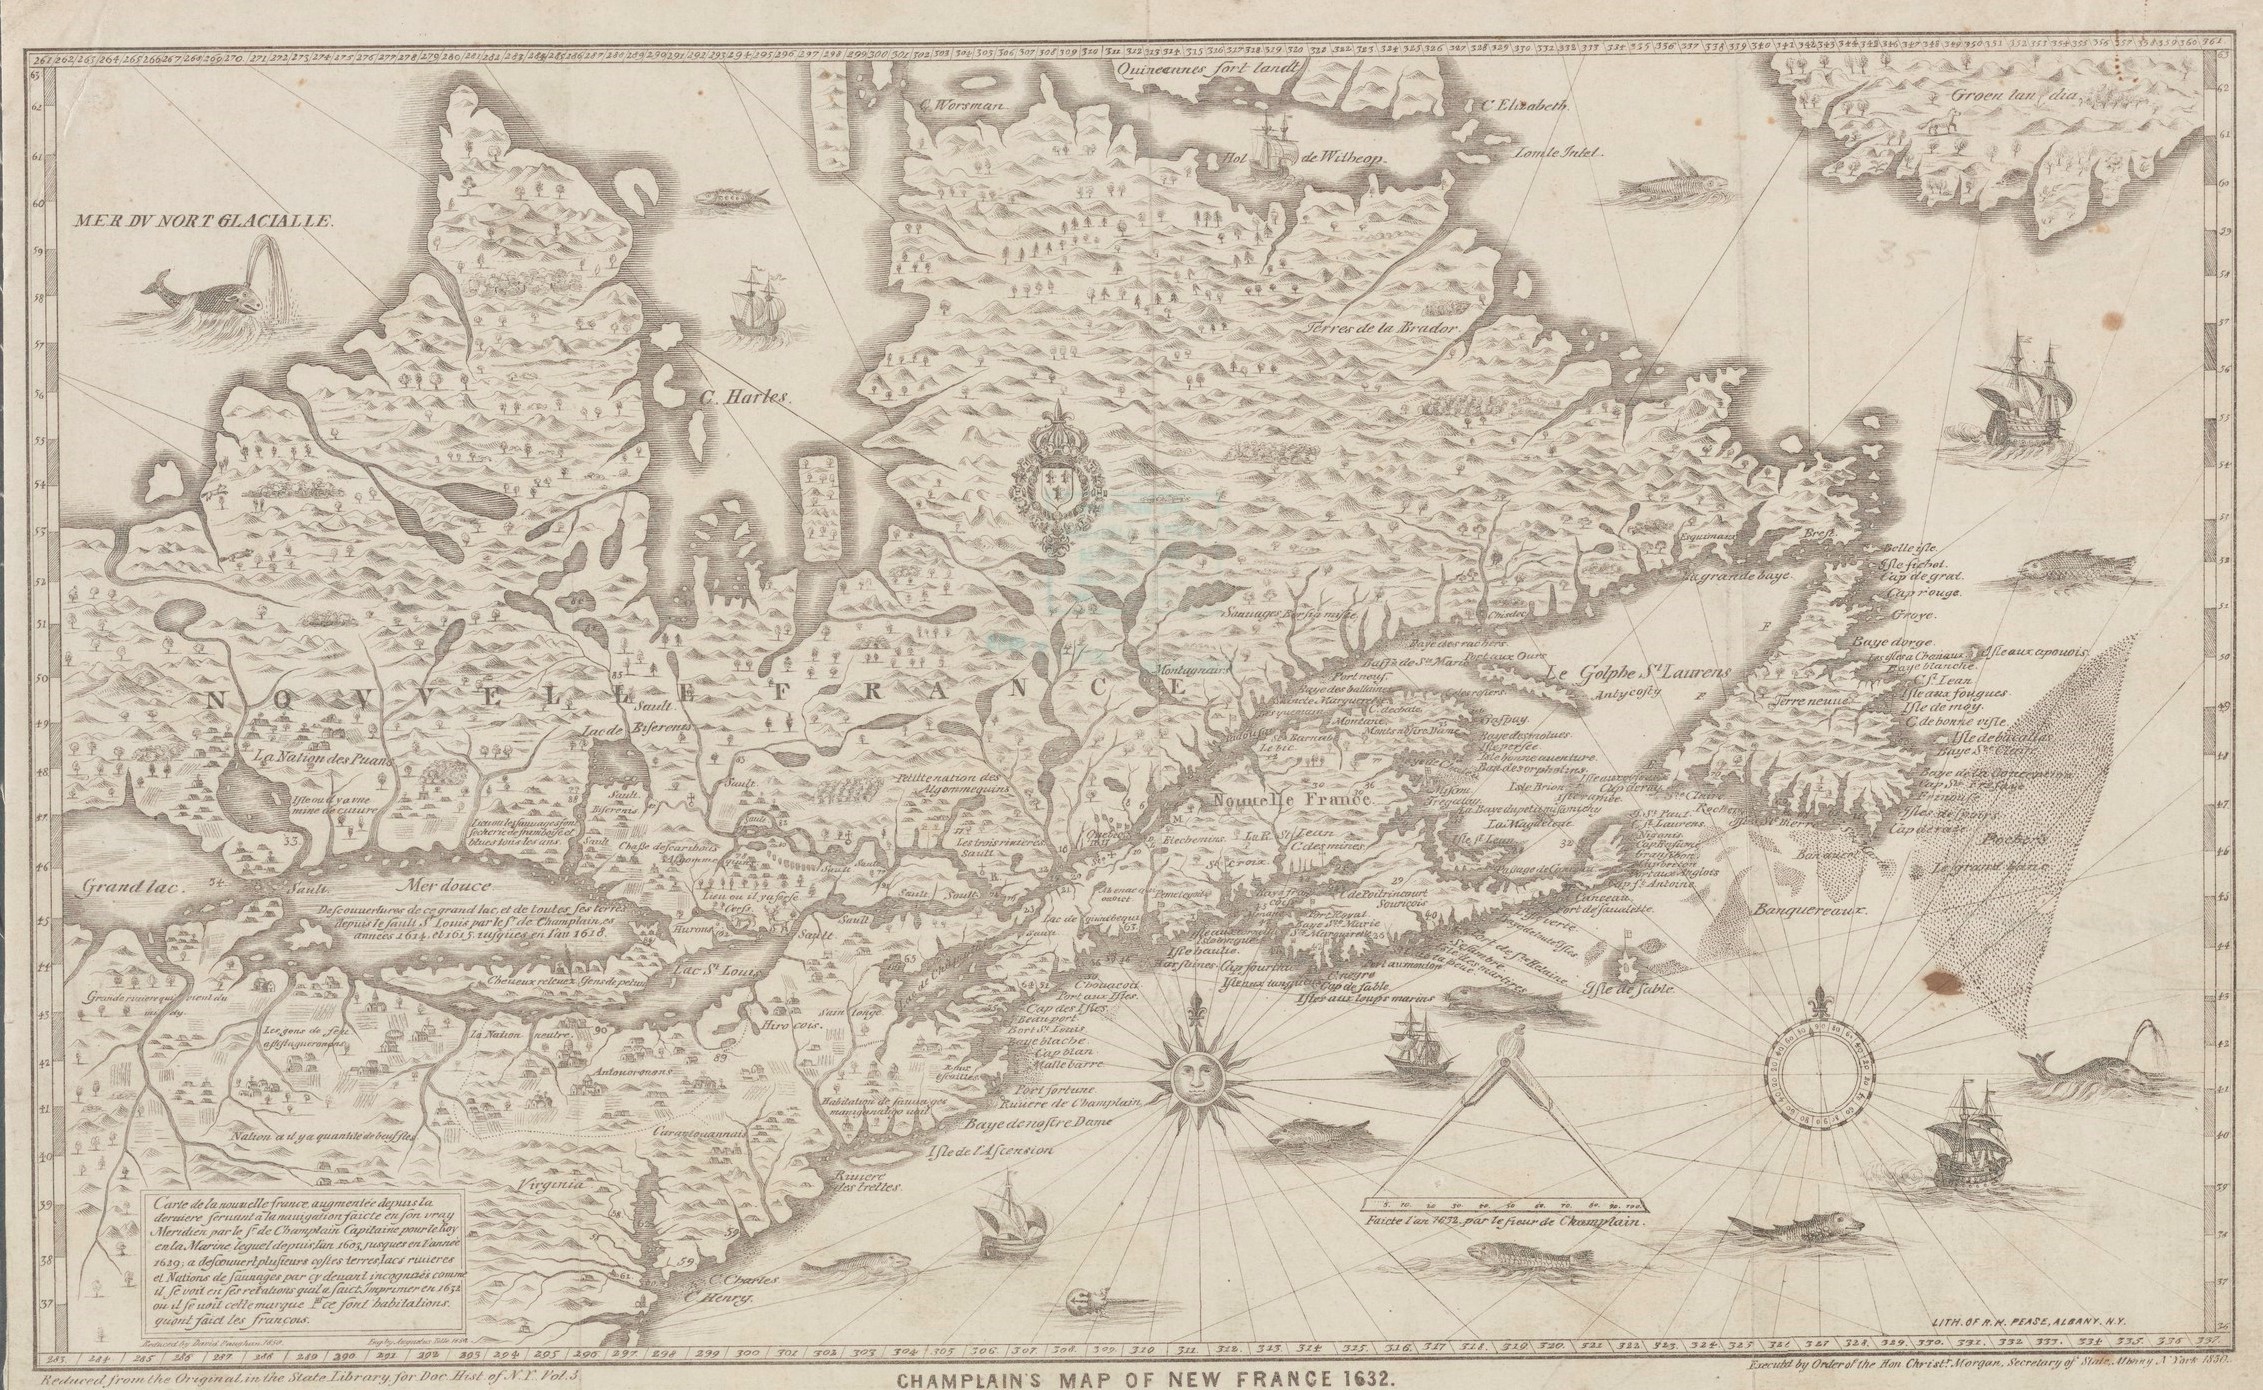 The original 1632 map: Samuel de Champlain.  This 1850 copy: "Reduced from the original", reduced by David Vaughan, engraved by Augustus Tolle. This image is available from the New York Public Library's Digital Library under the digital ID c3c6b360-f8c2-0132-54d4-58d385a7bbd0: digitalgallery.nypl.org From Wikimedia Commons, the free media repository 